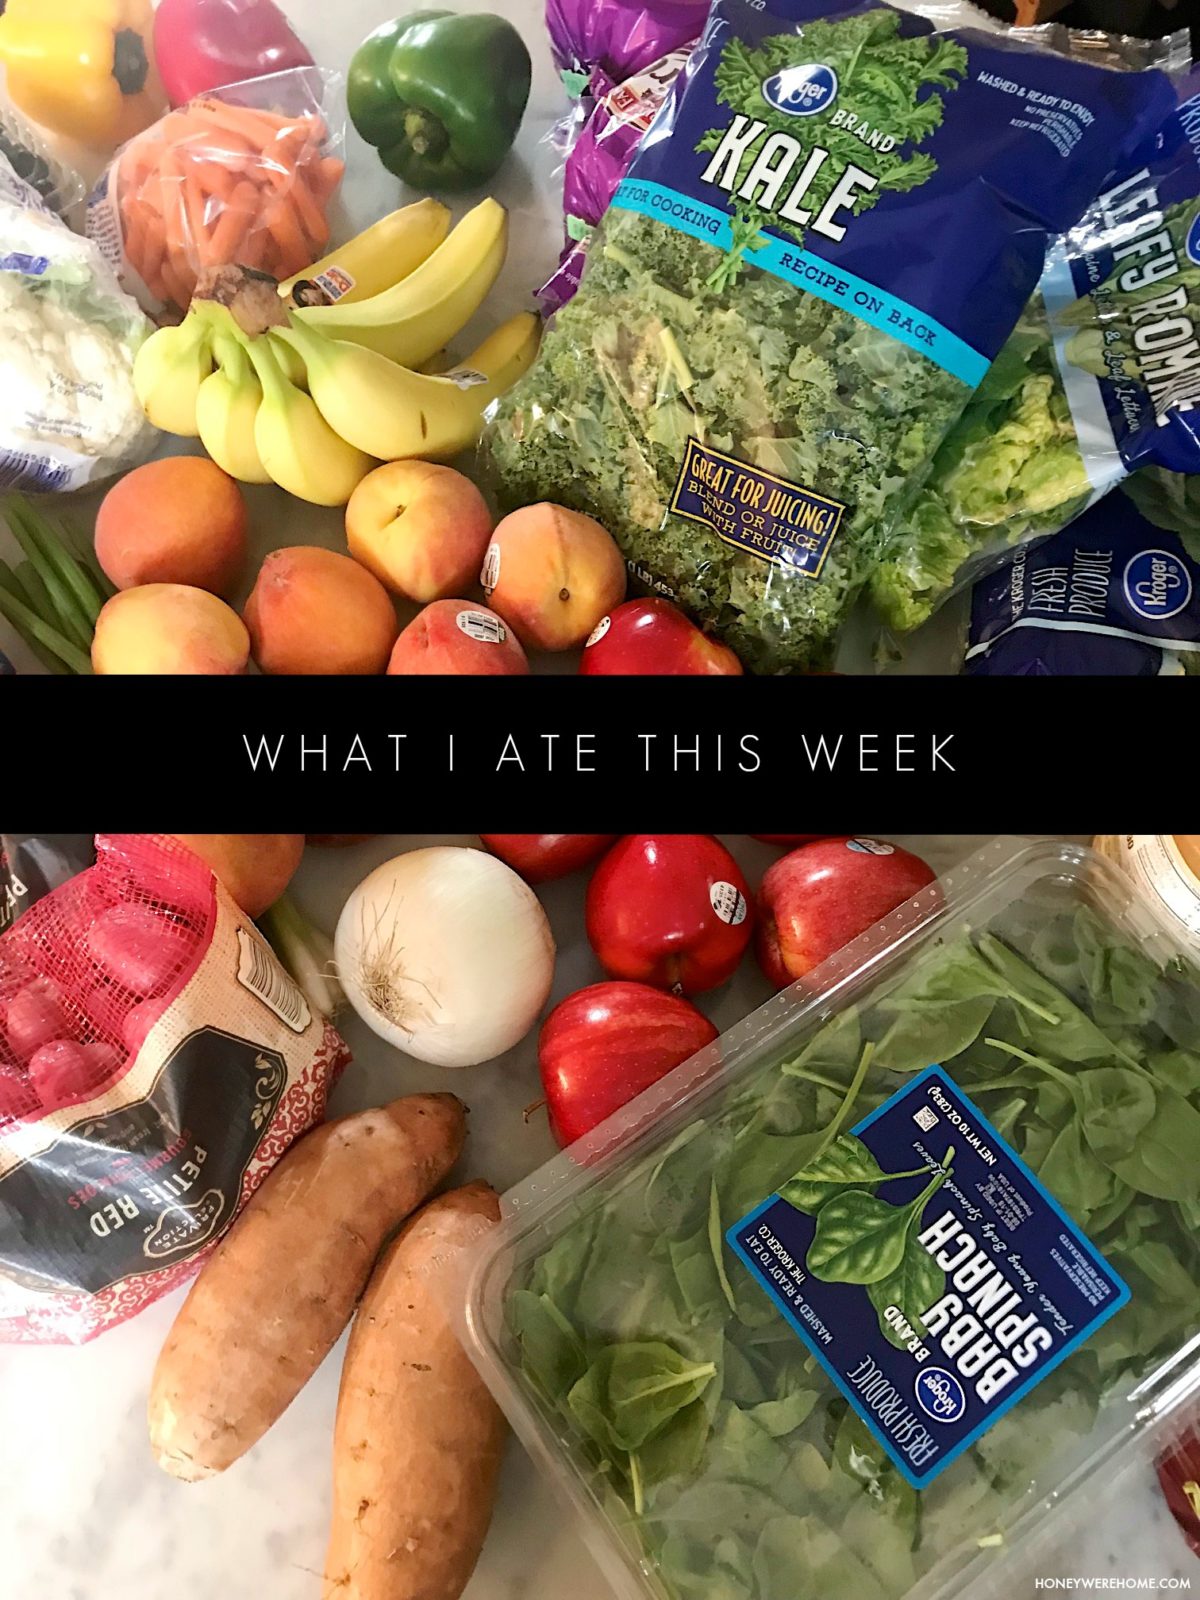 what i eat in a week